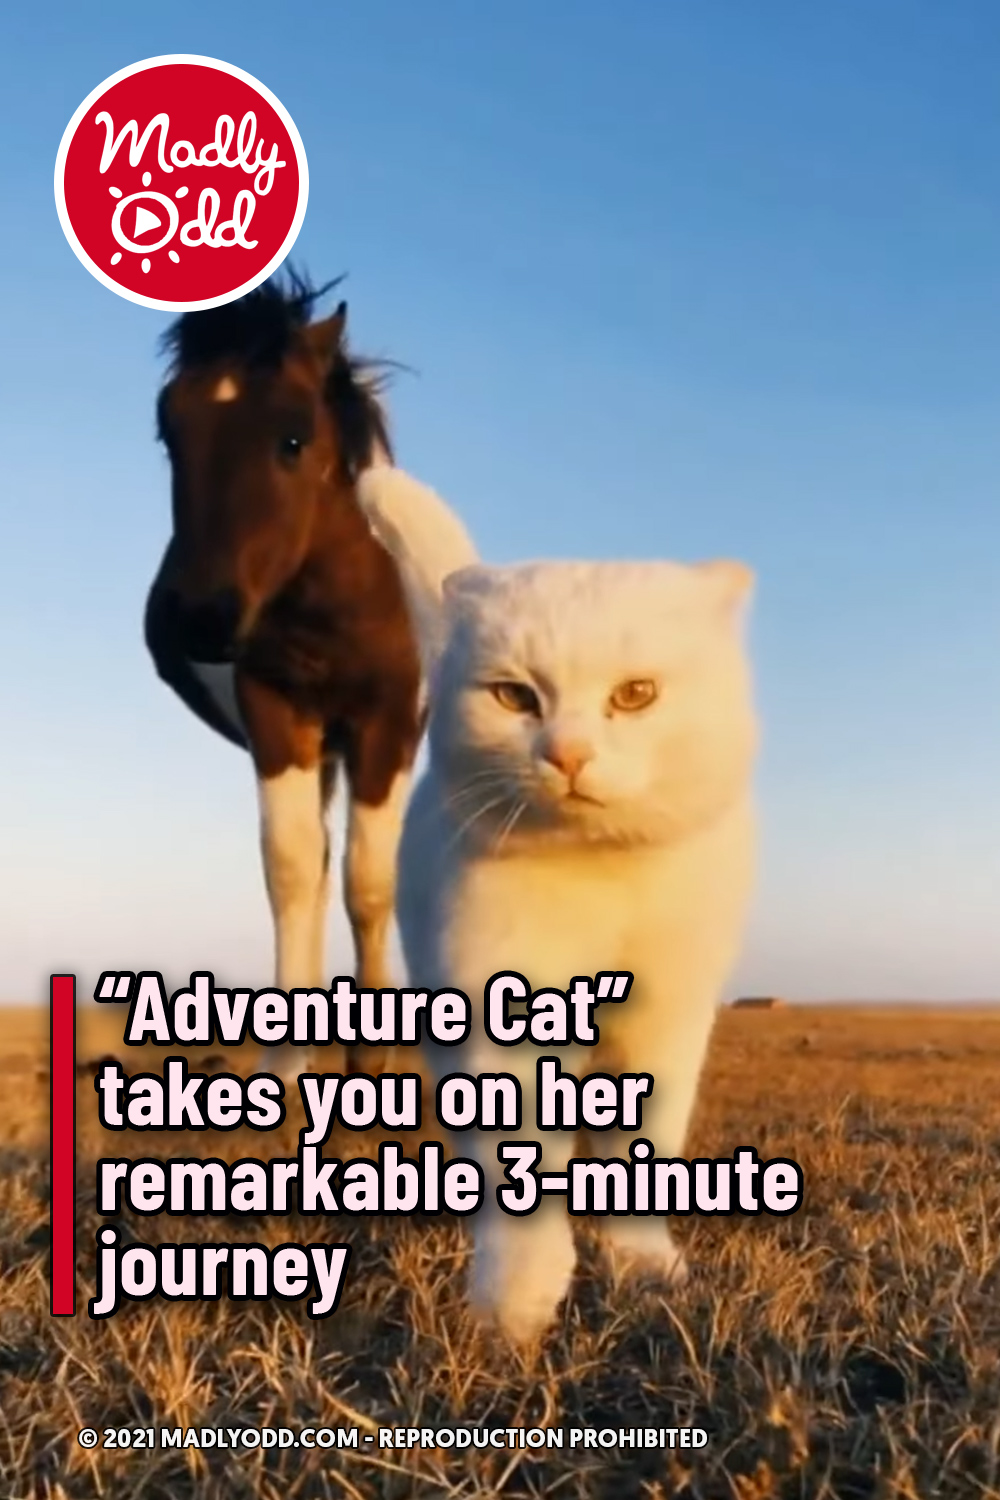 “Adventure Cat” takes you on her remarkable 3-minute journey